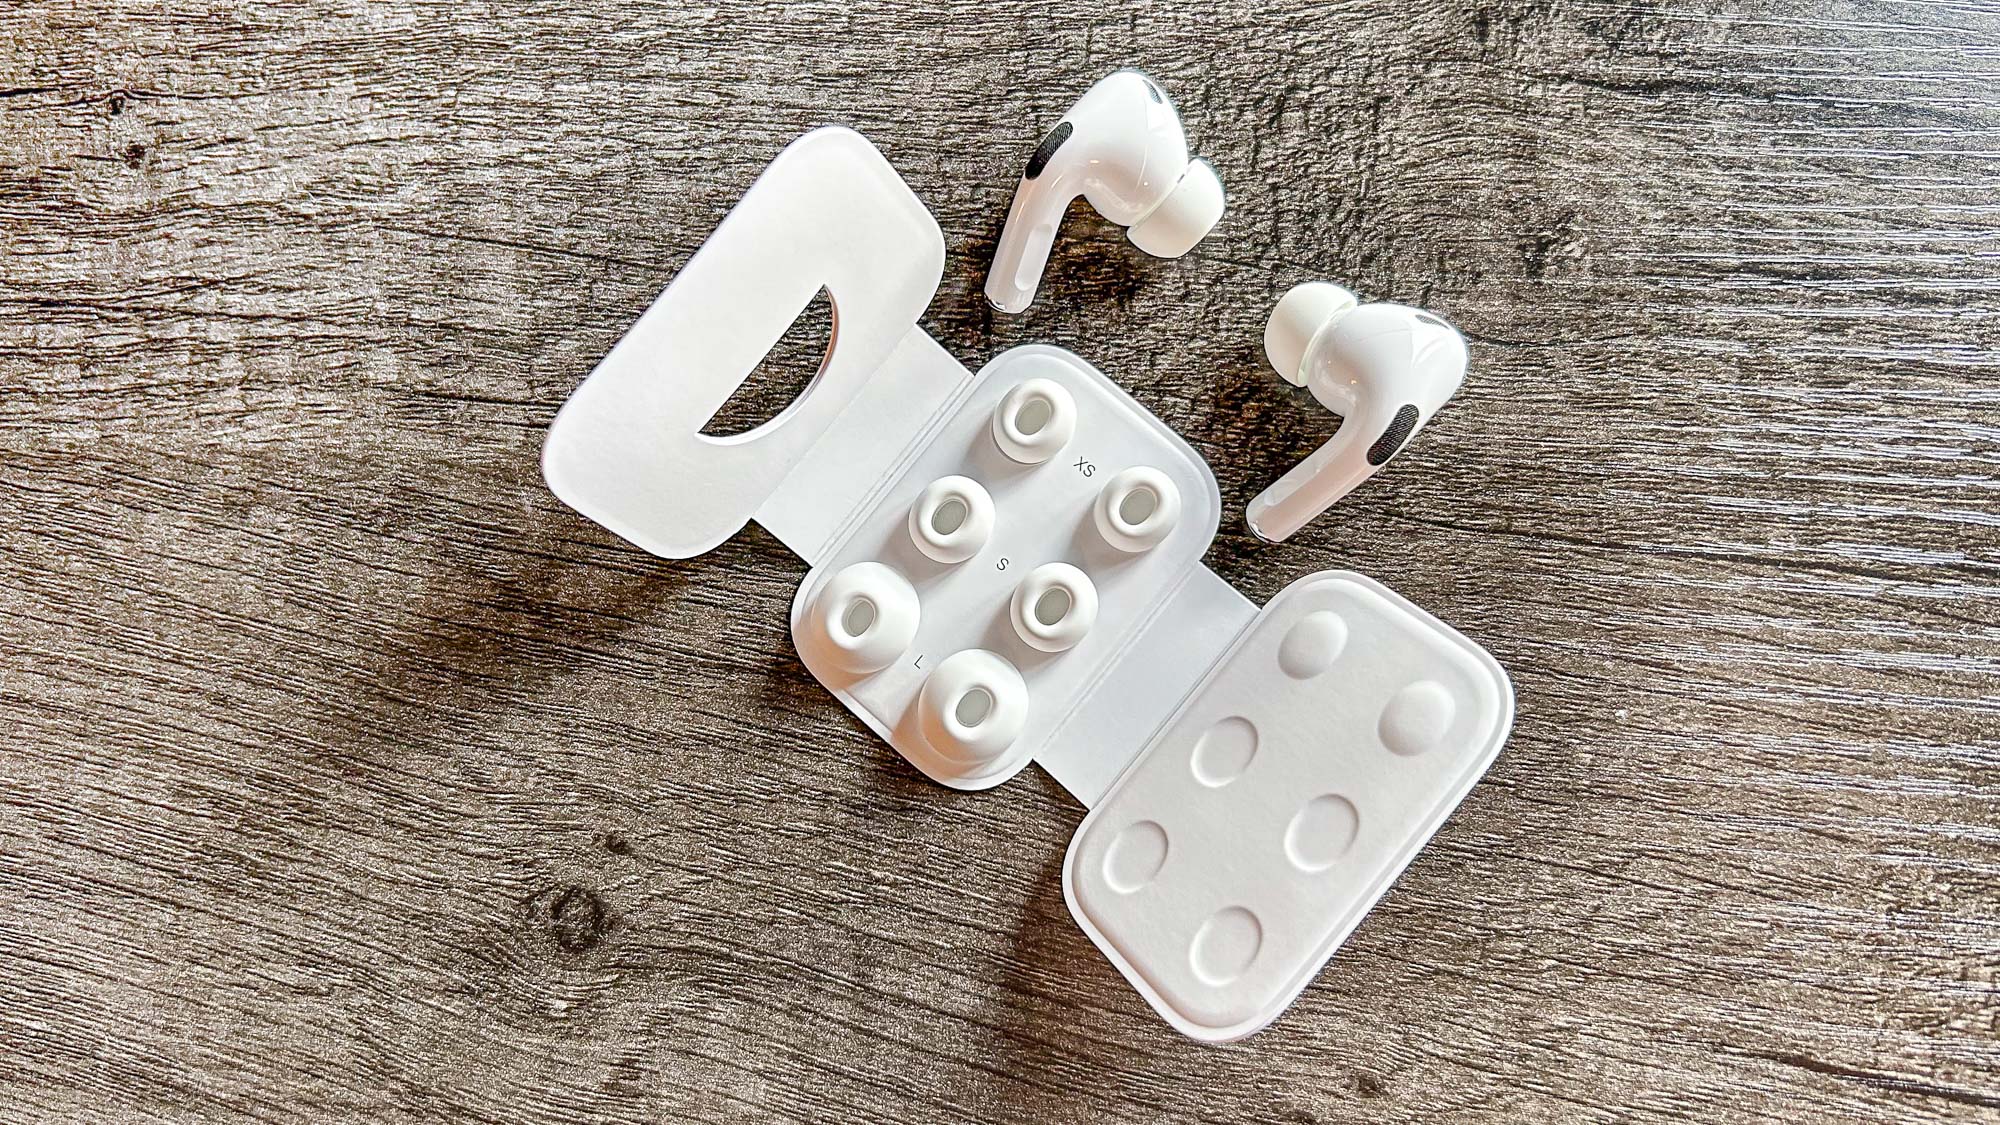 Apple AirPods Pro (2nd generation) size attachments